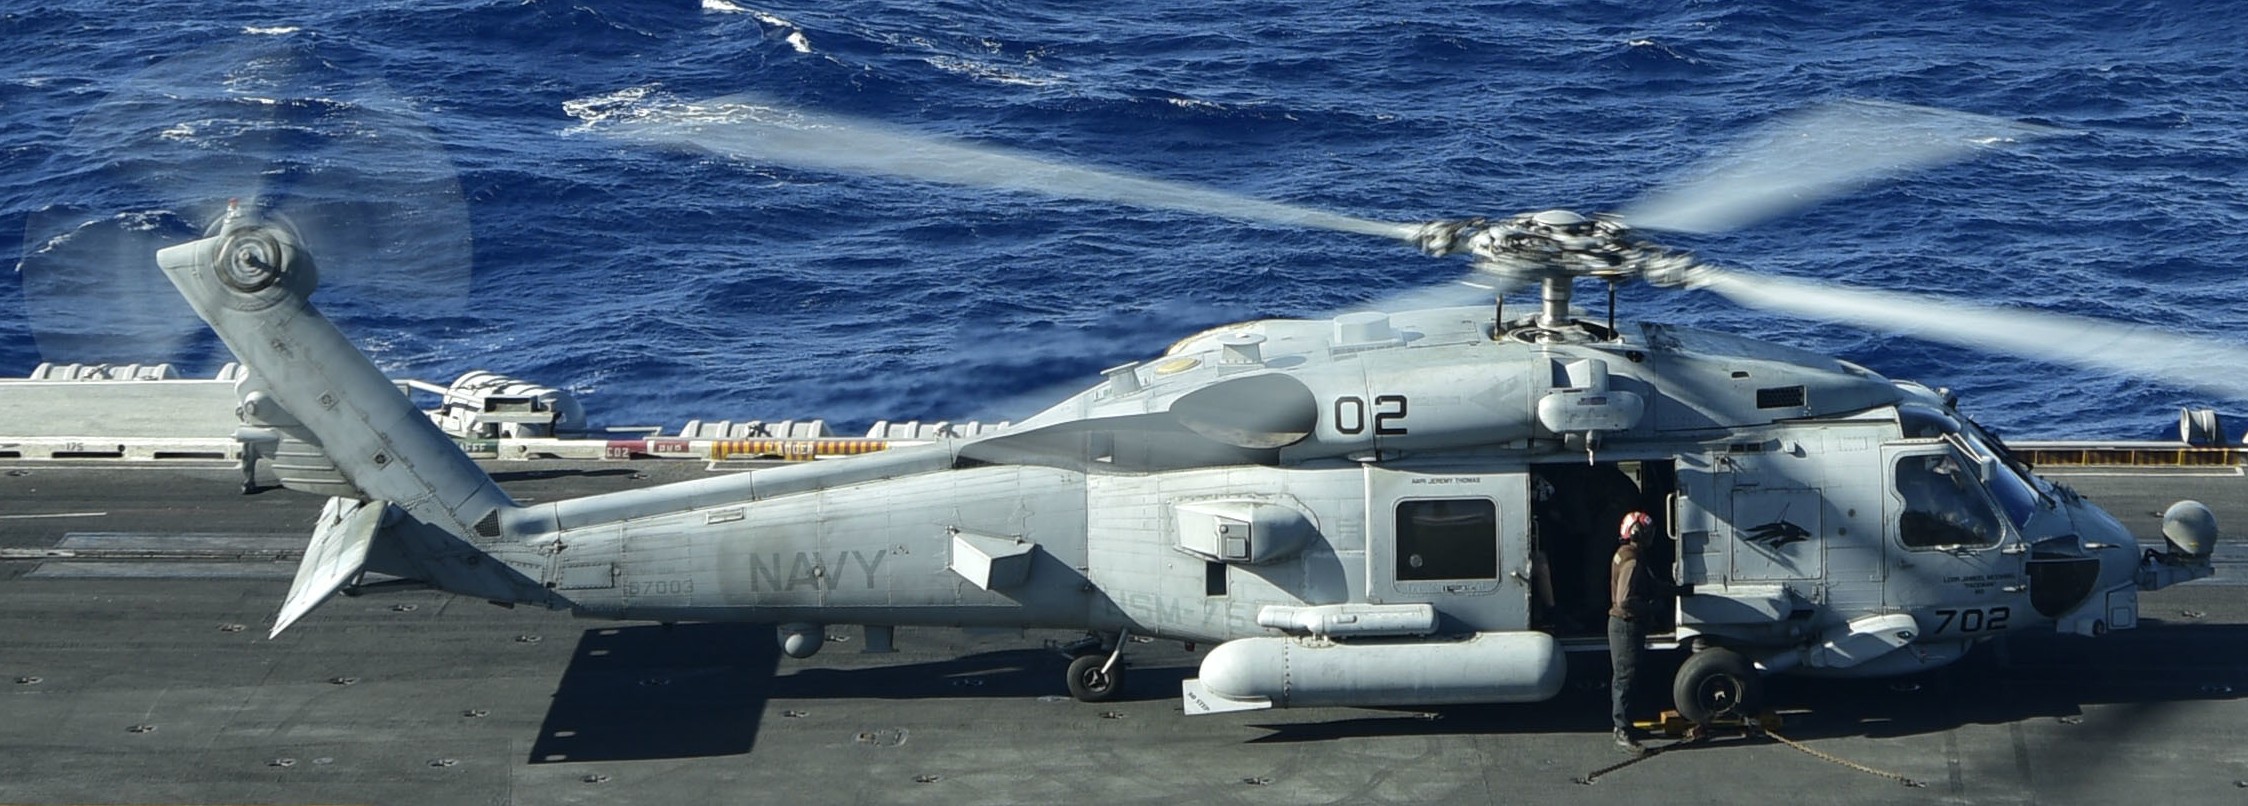 hsm-75 wolfpack helicopter maritime strike squadron us navy mh-60r seahawk 2013 19